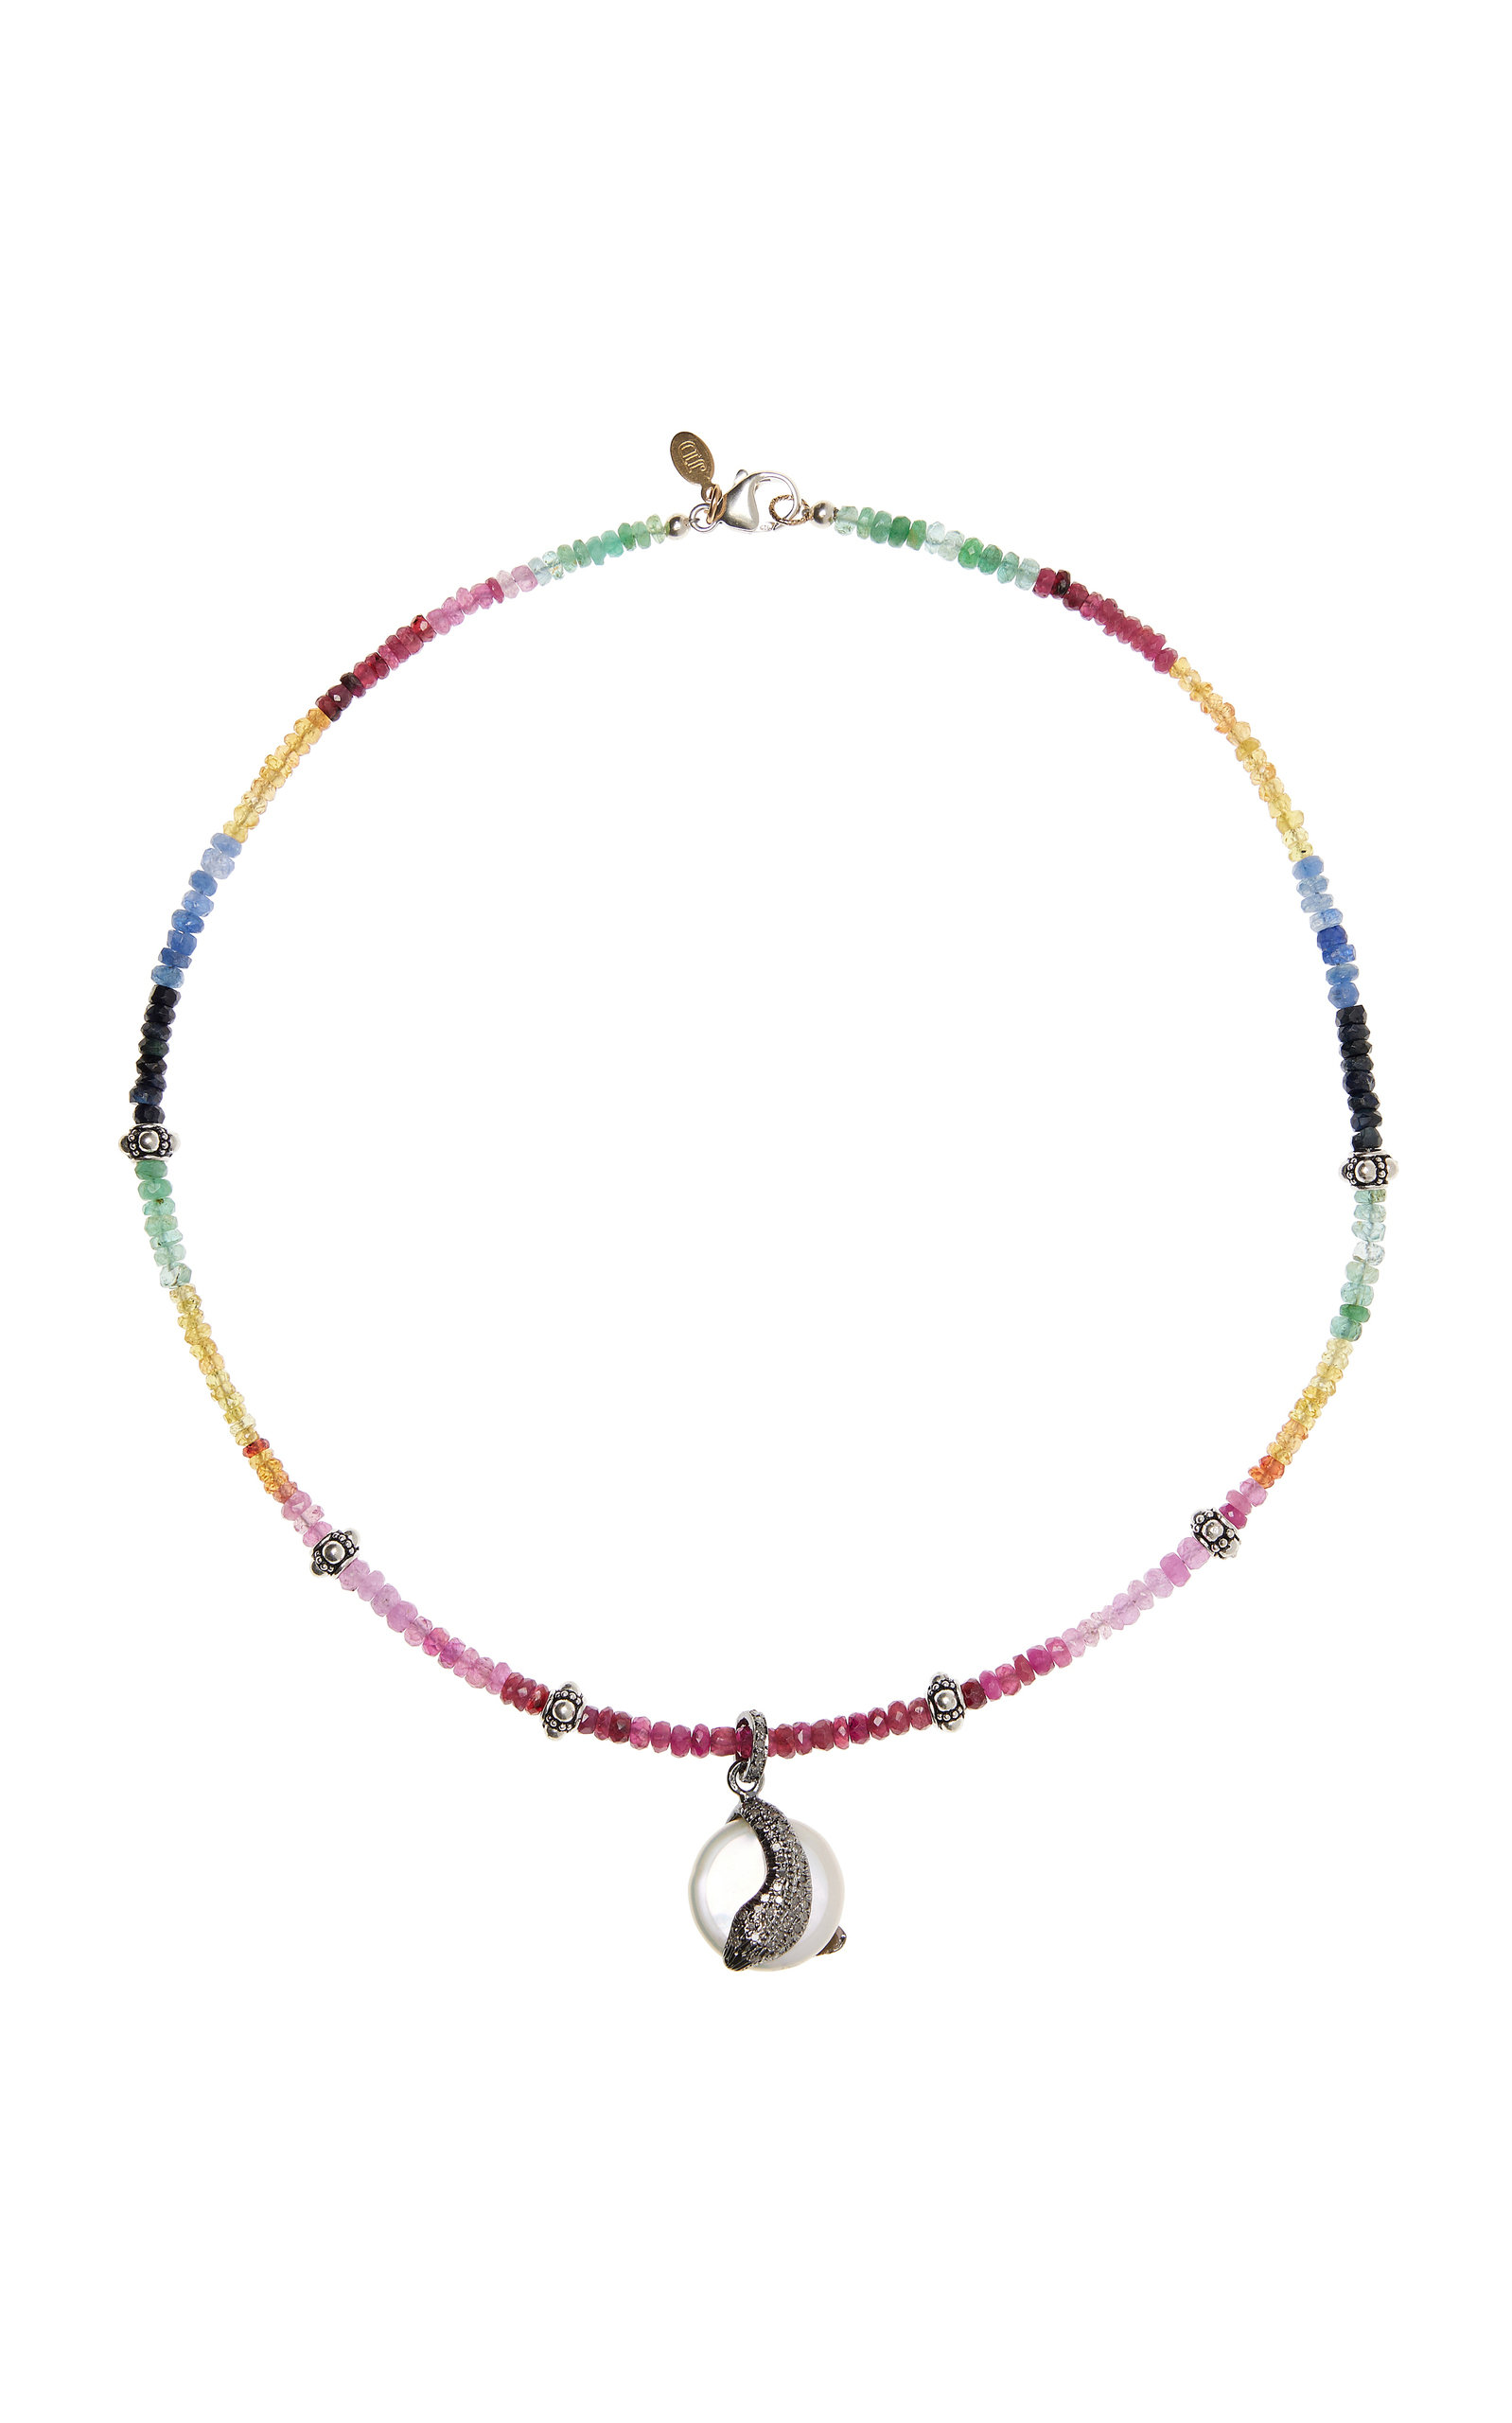 Joie DiGiovanni Women's Ruby; Emerald and Sapphire Diamond Snake Necklace